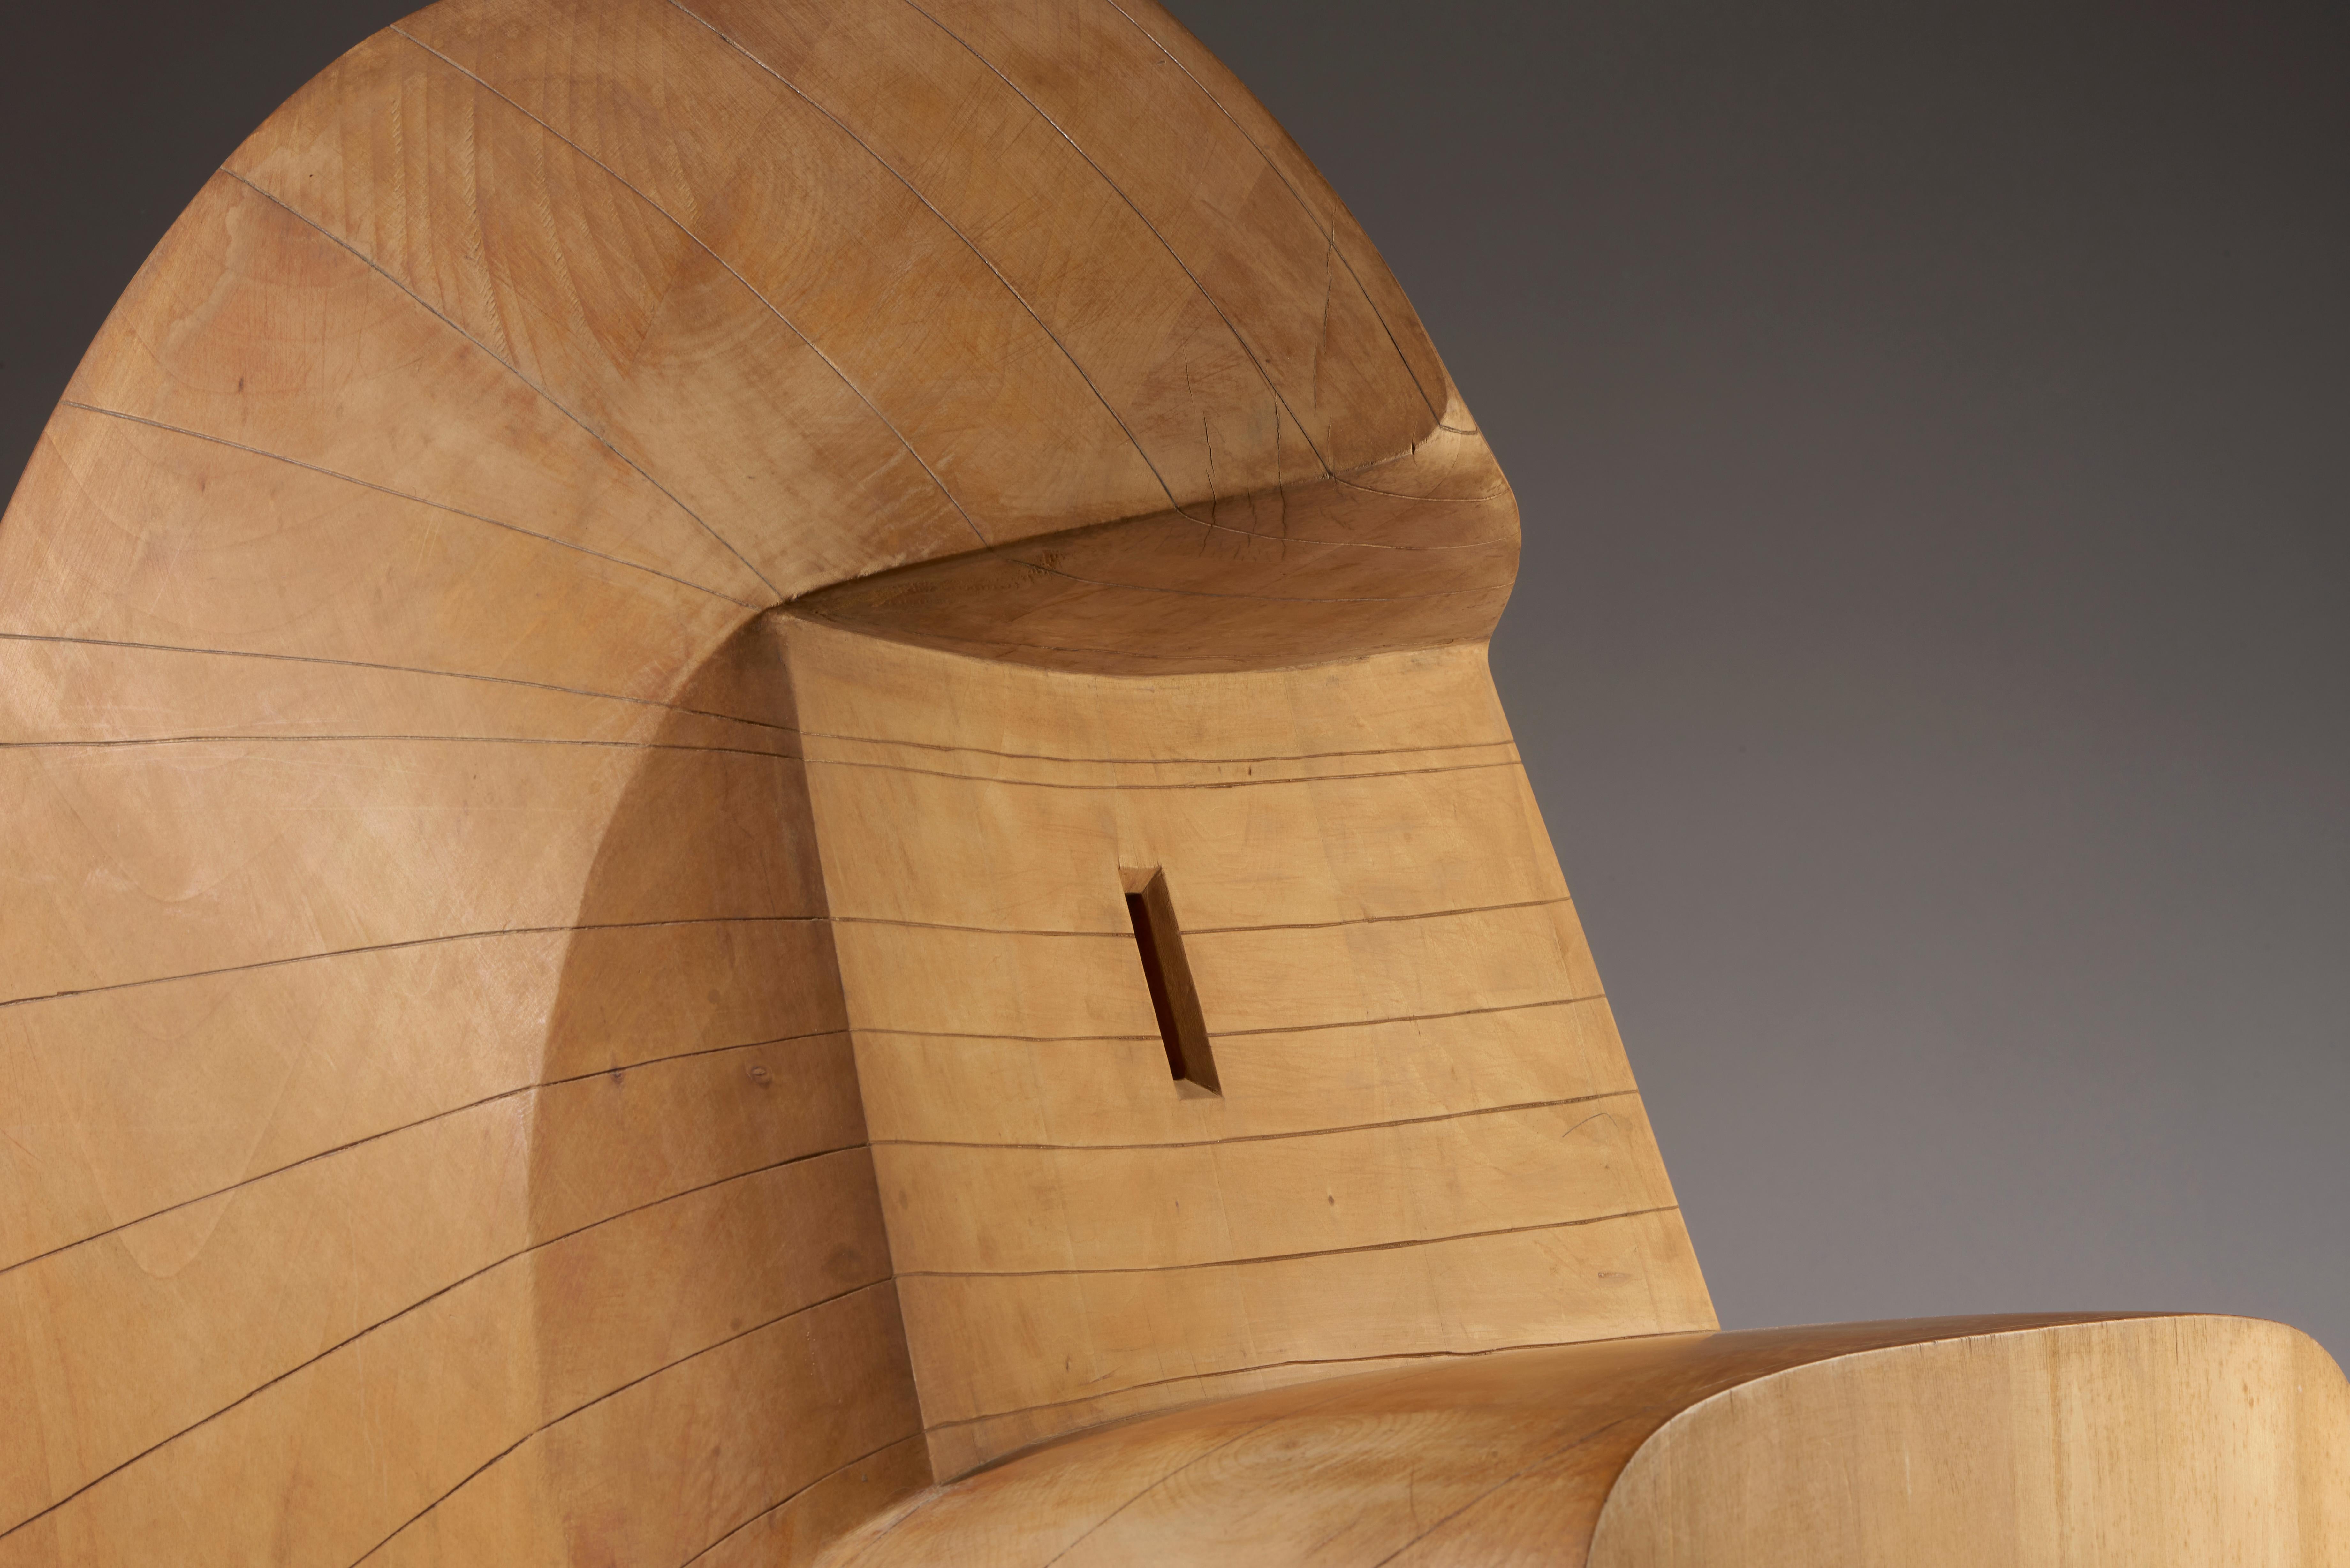 Giuseppe Rivadossi (Nave, July 8, 1935)  Shed, 1974 Wood sculpture For Sale 7